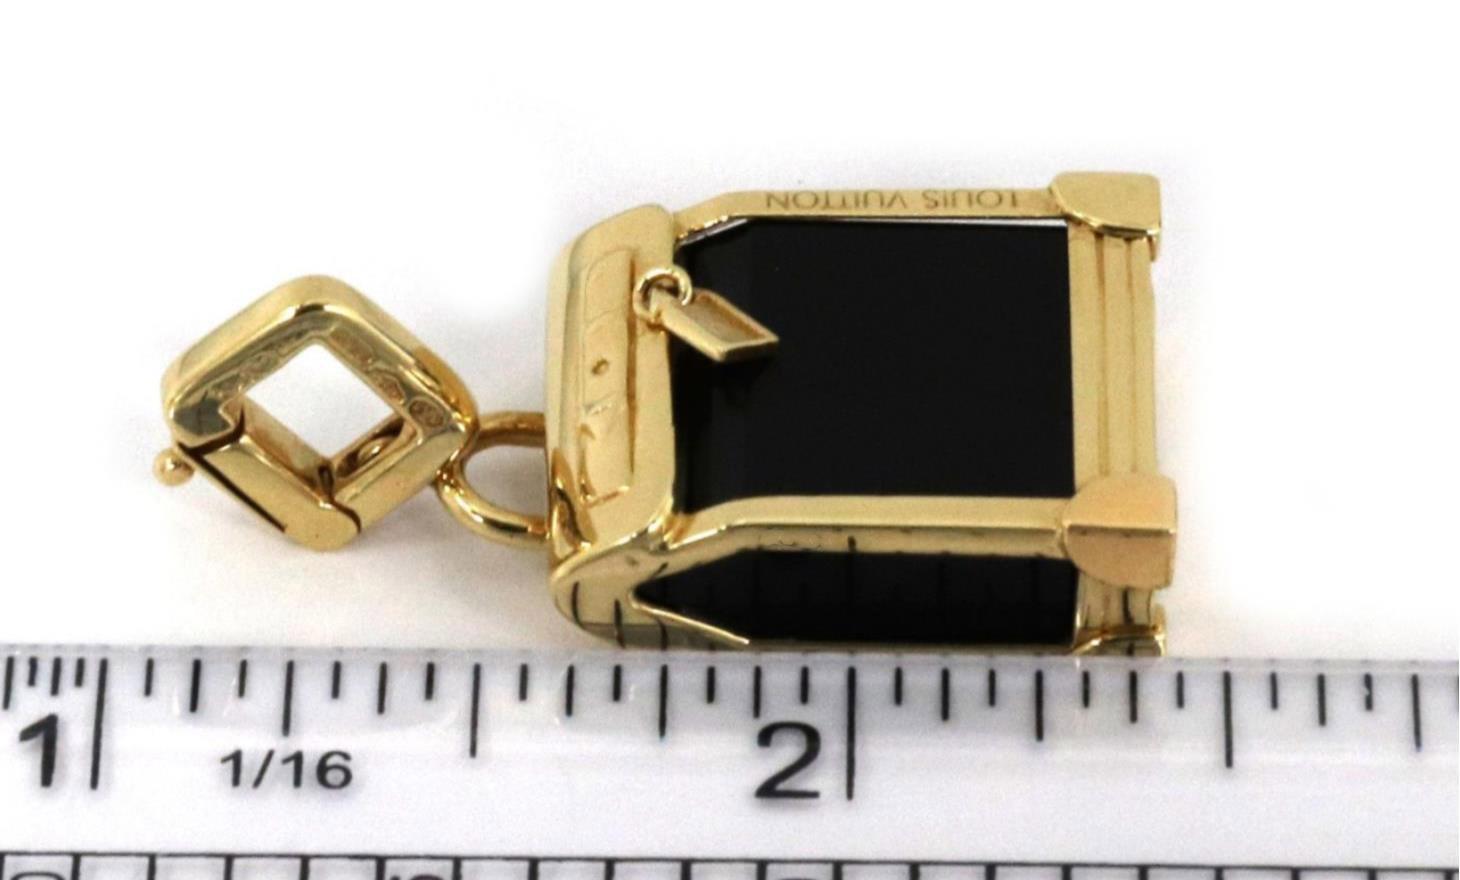 Louis Vuitton Steamer Bag 18k Yellow Gold Onyx Charm Pendant In Excellent Condition For Sale In Boca Raton, FL